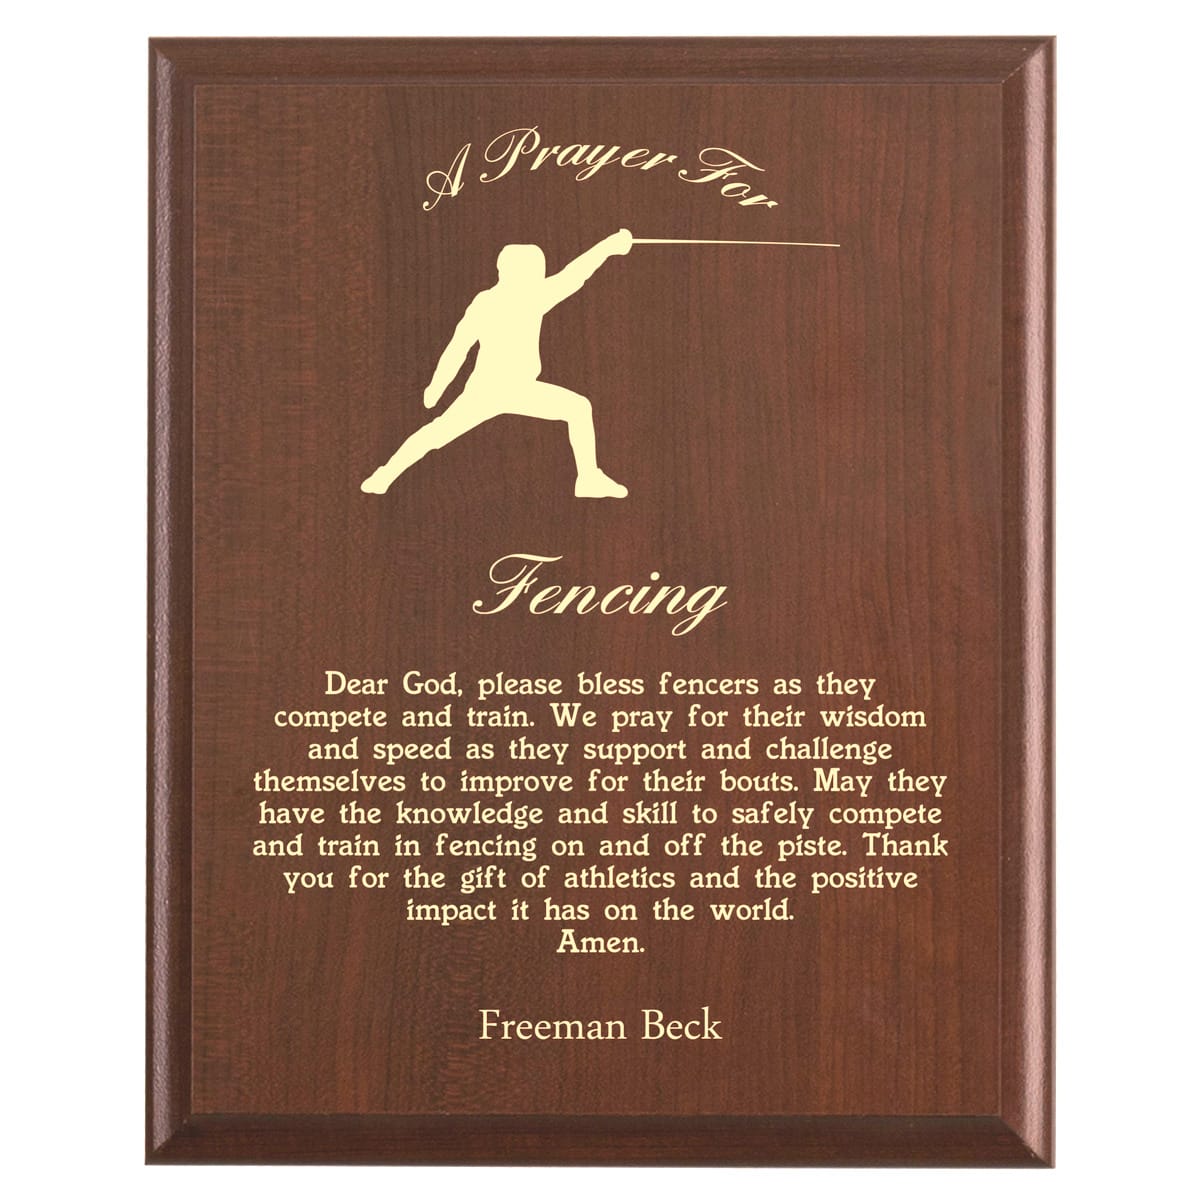 Plaque photo: Fencing Prayer Plaque design with free personalization. Wood style finish with customized text.